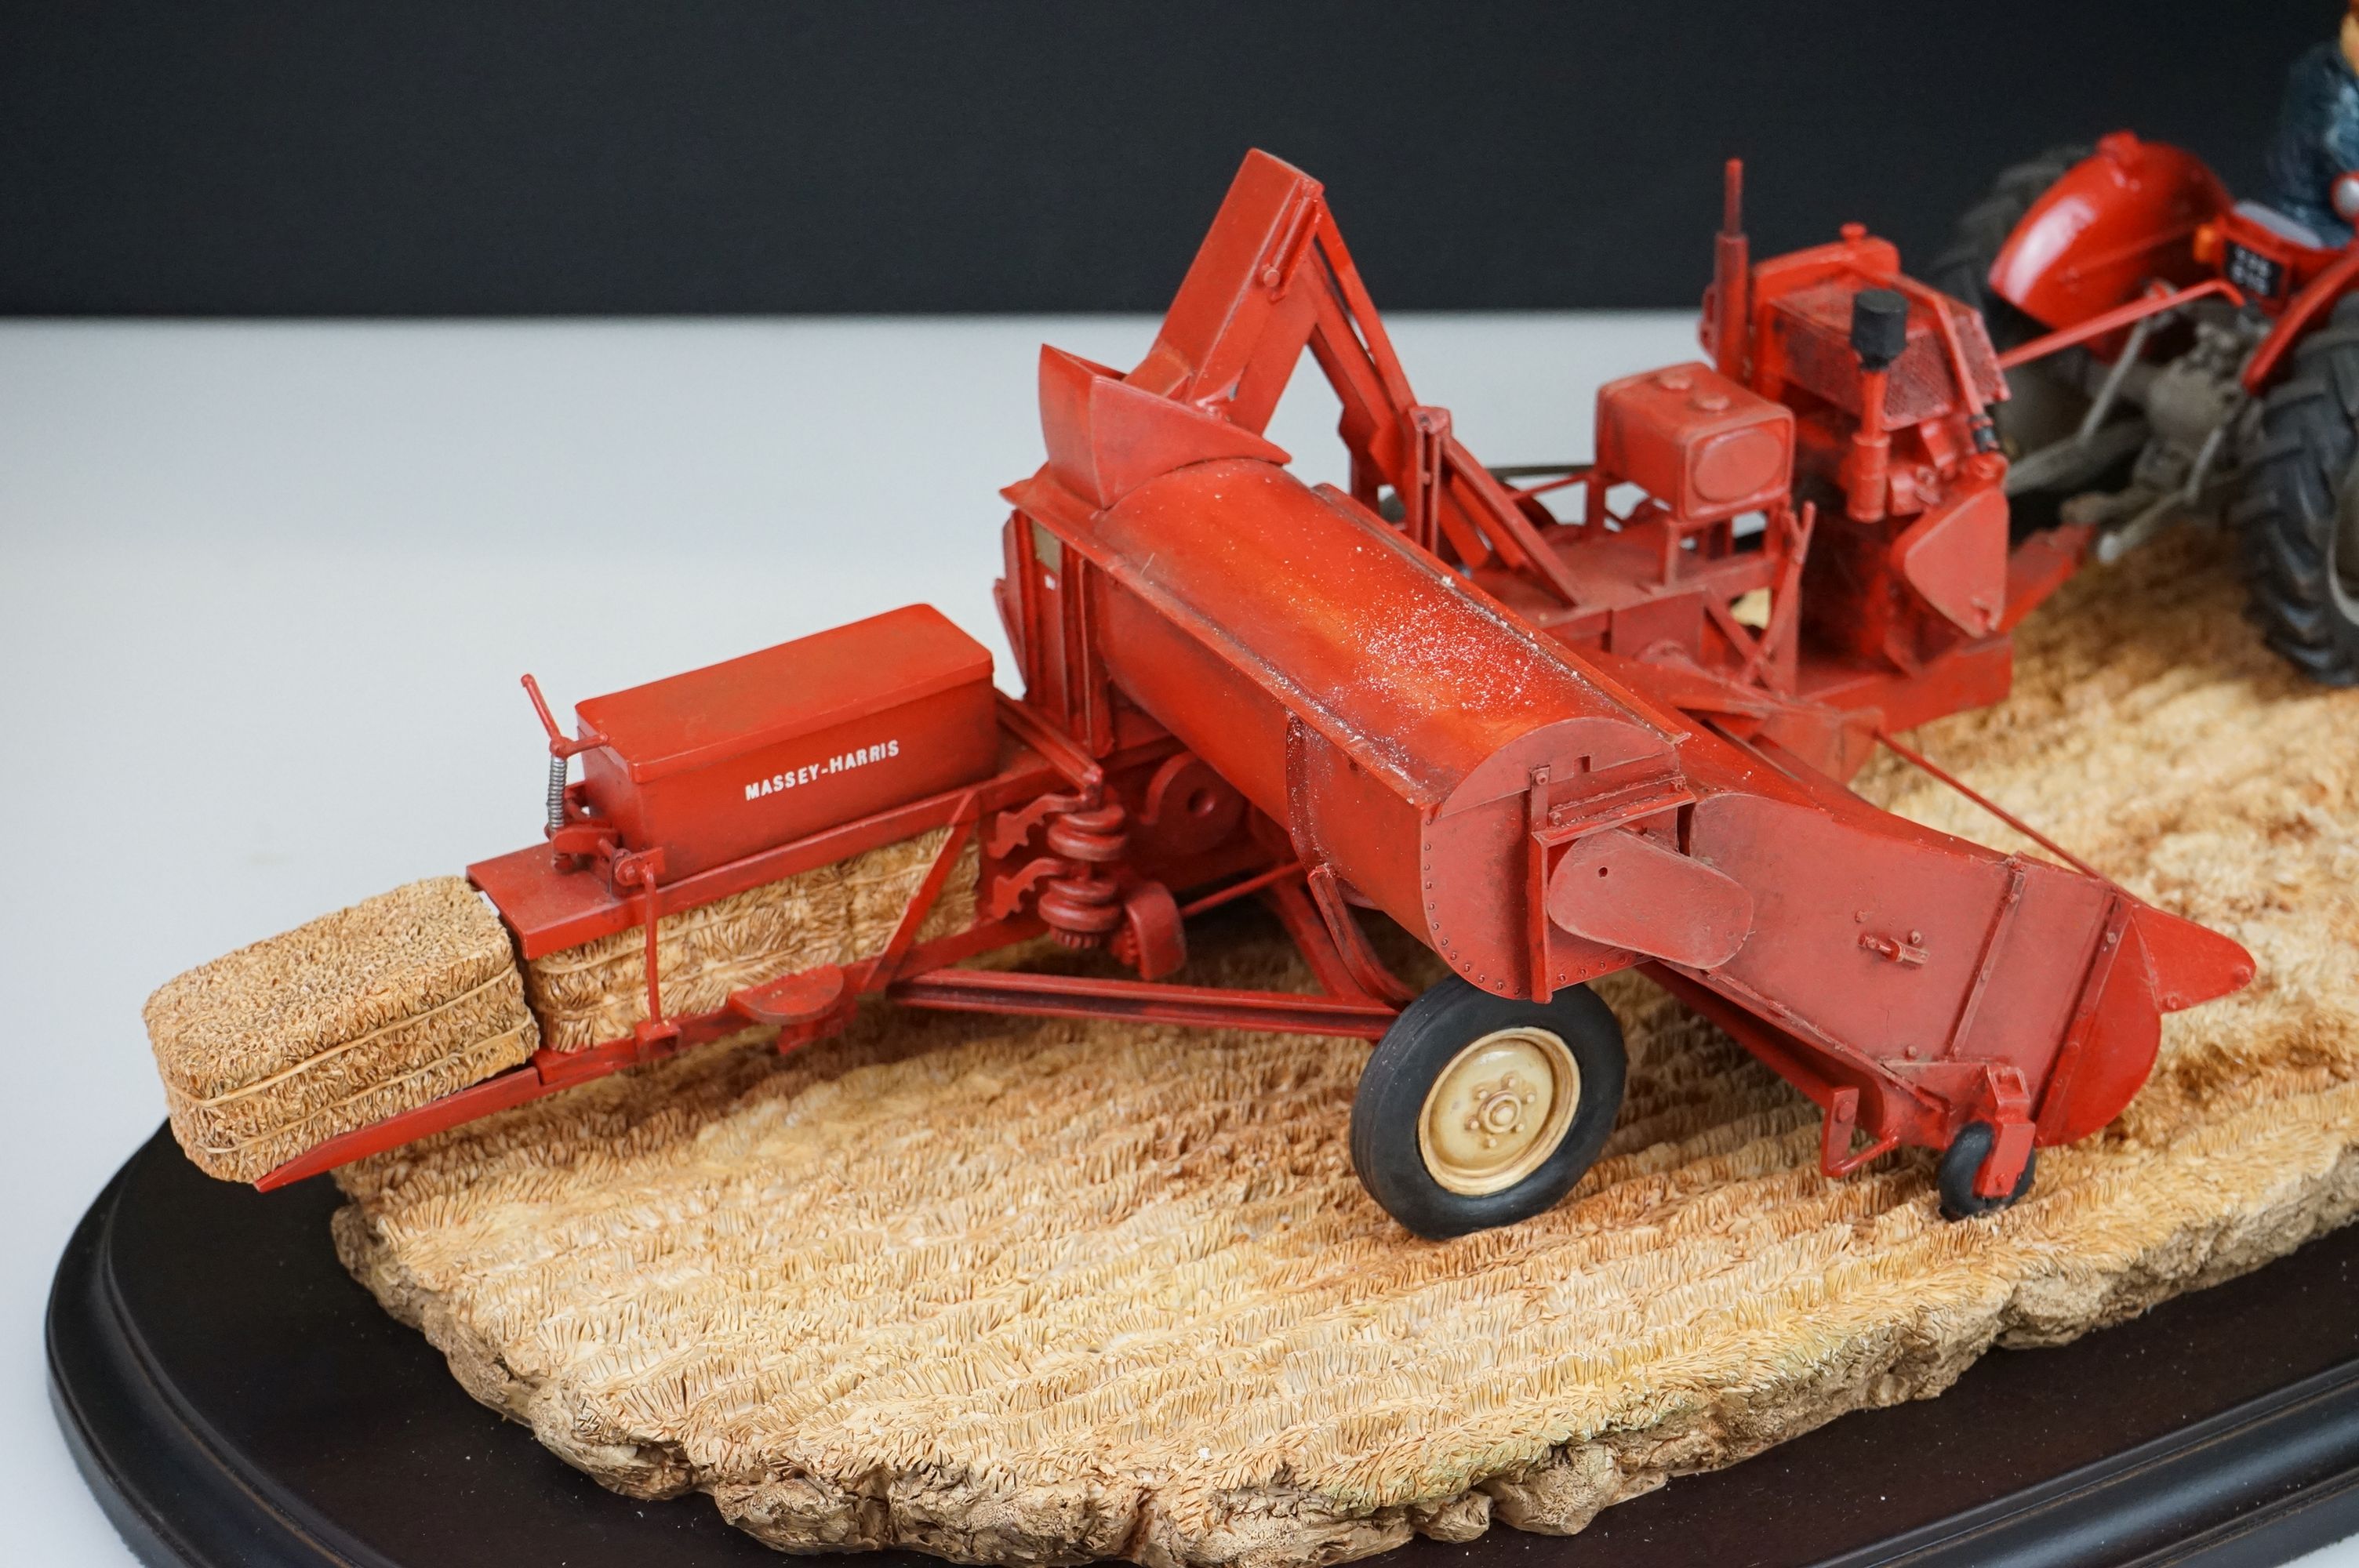 Country Artists Model of a Hay Baling titled ' Safely gathered in ' by Keith Sherwin on a wooden - Image 2 of 4